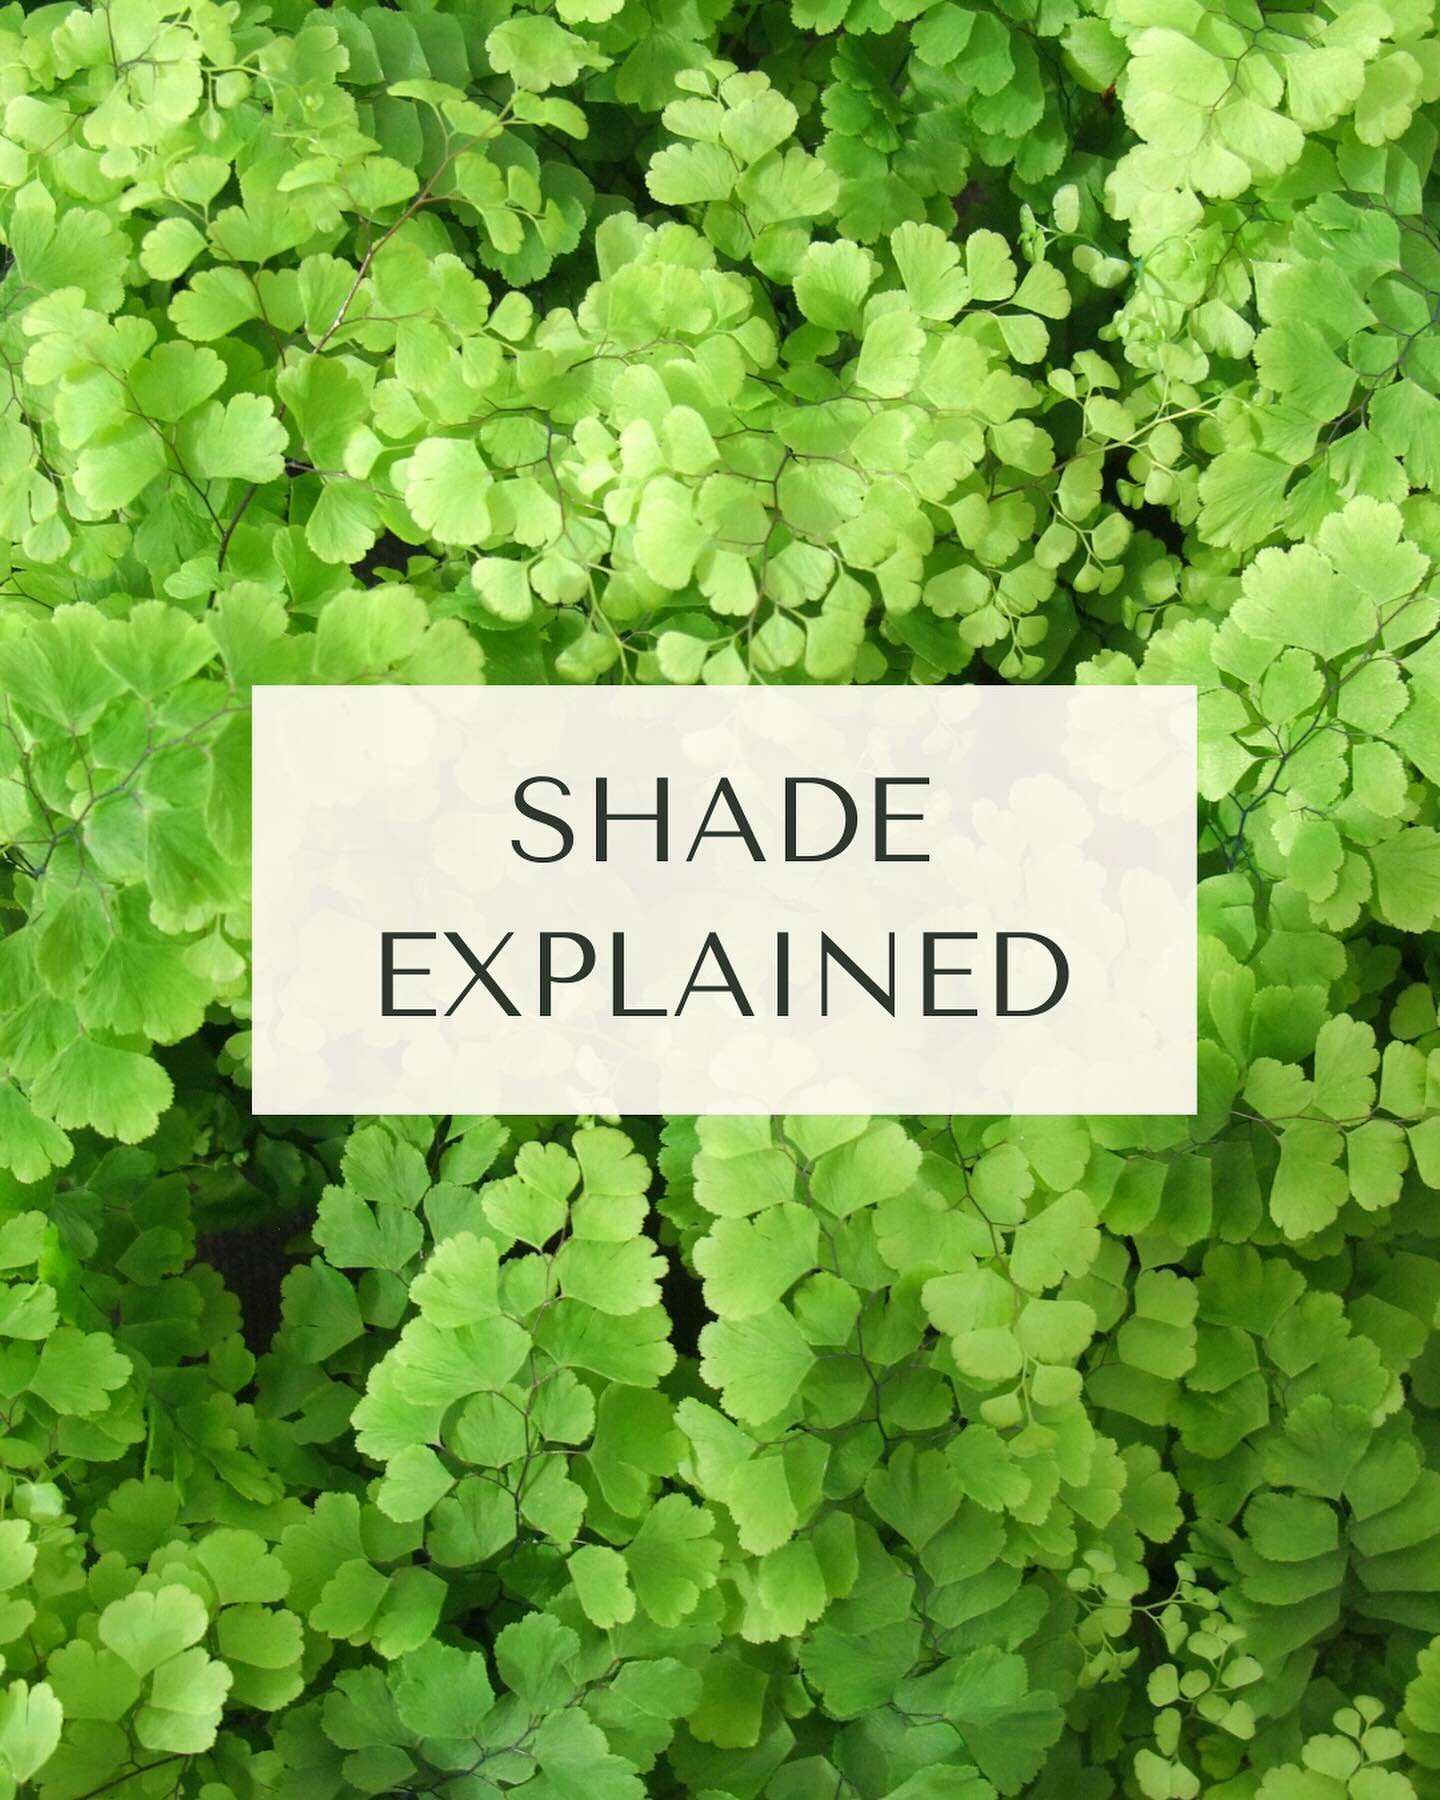 Today was the final plant setting out in an Edinburgh garden. And it was the turn of the shade lovers 💚💚💚

Which got me thinking about gardening shady areas and planting for shade. So many things to consider when choosing the right planting. But a